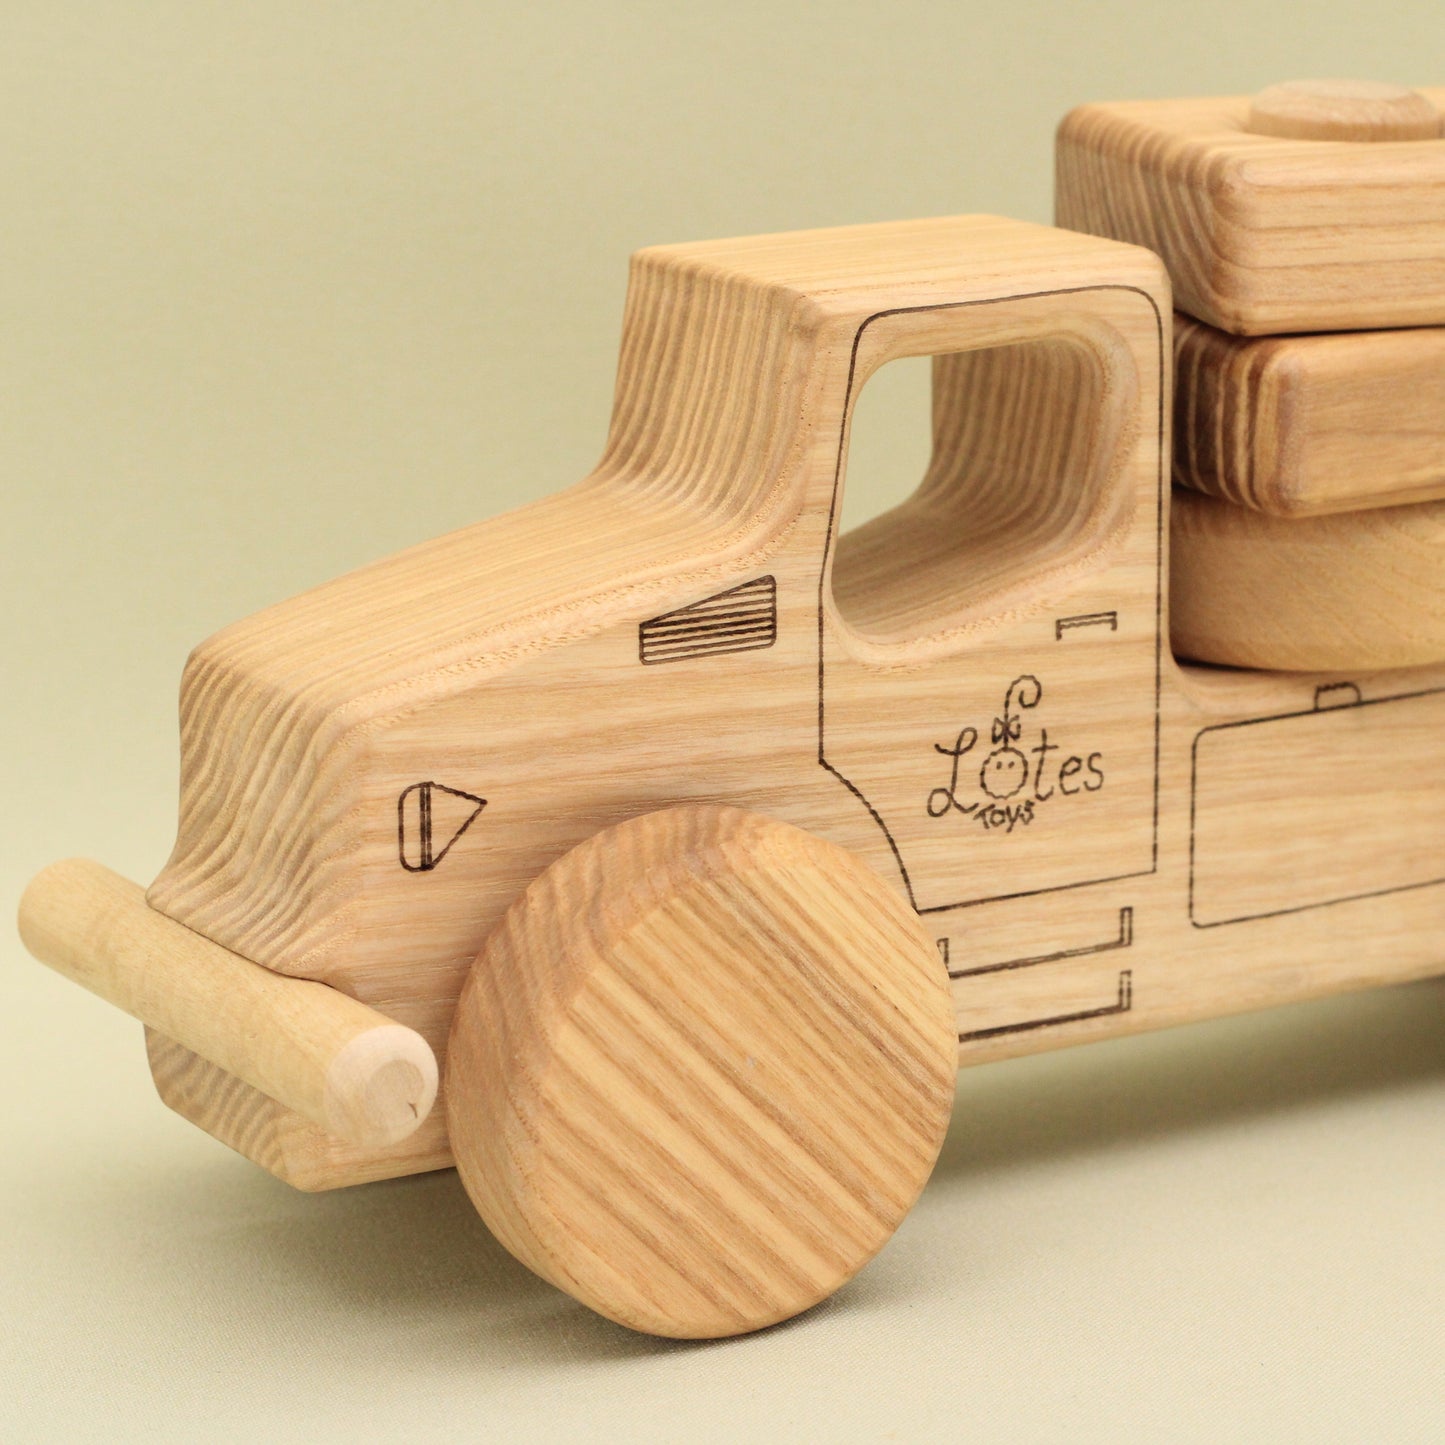 Lotes Toys Wooden Construction Vehicles Car BT51